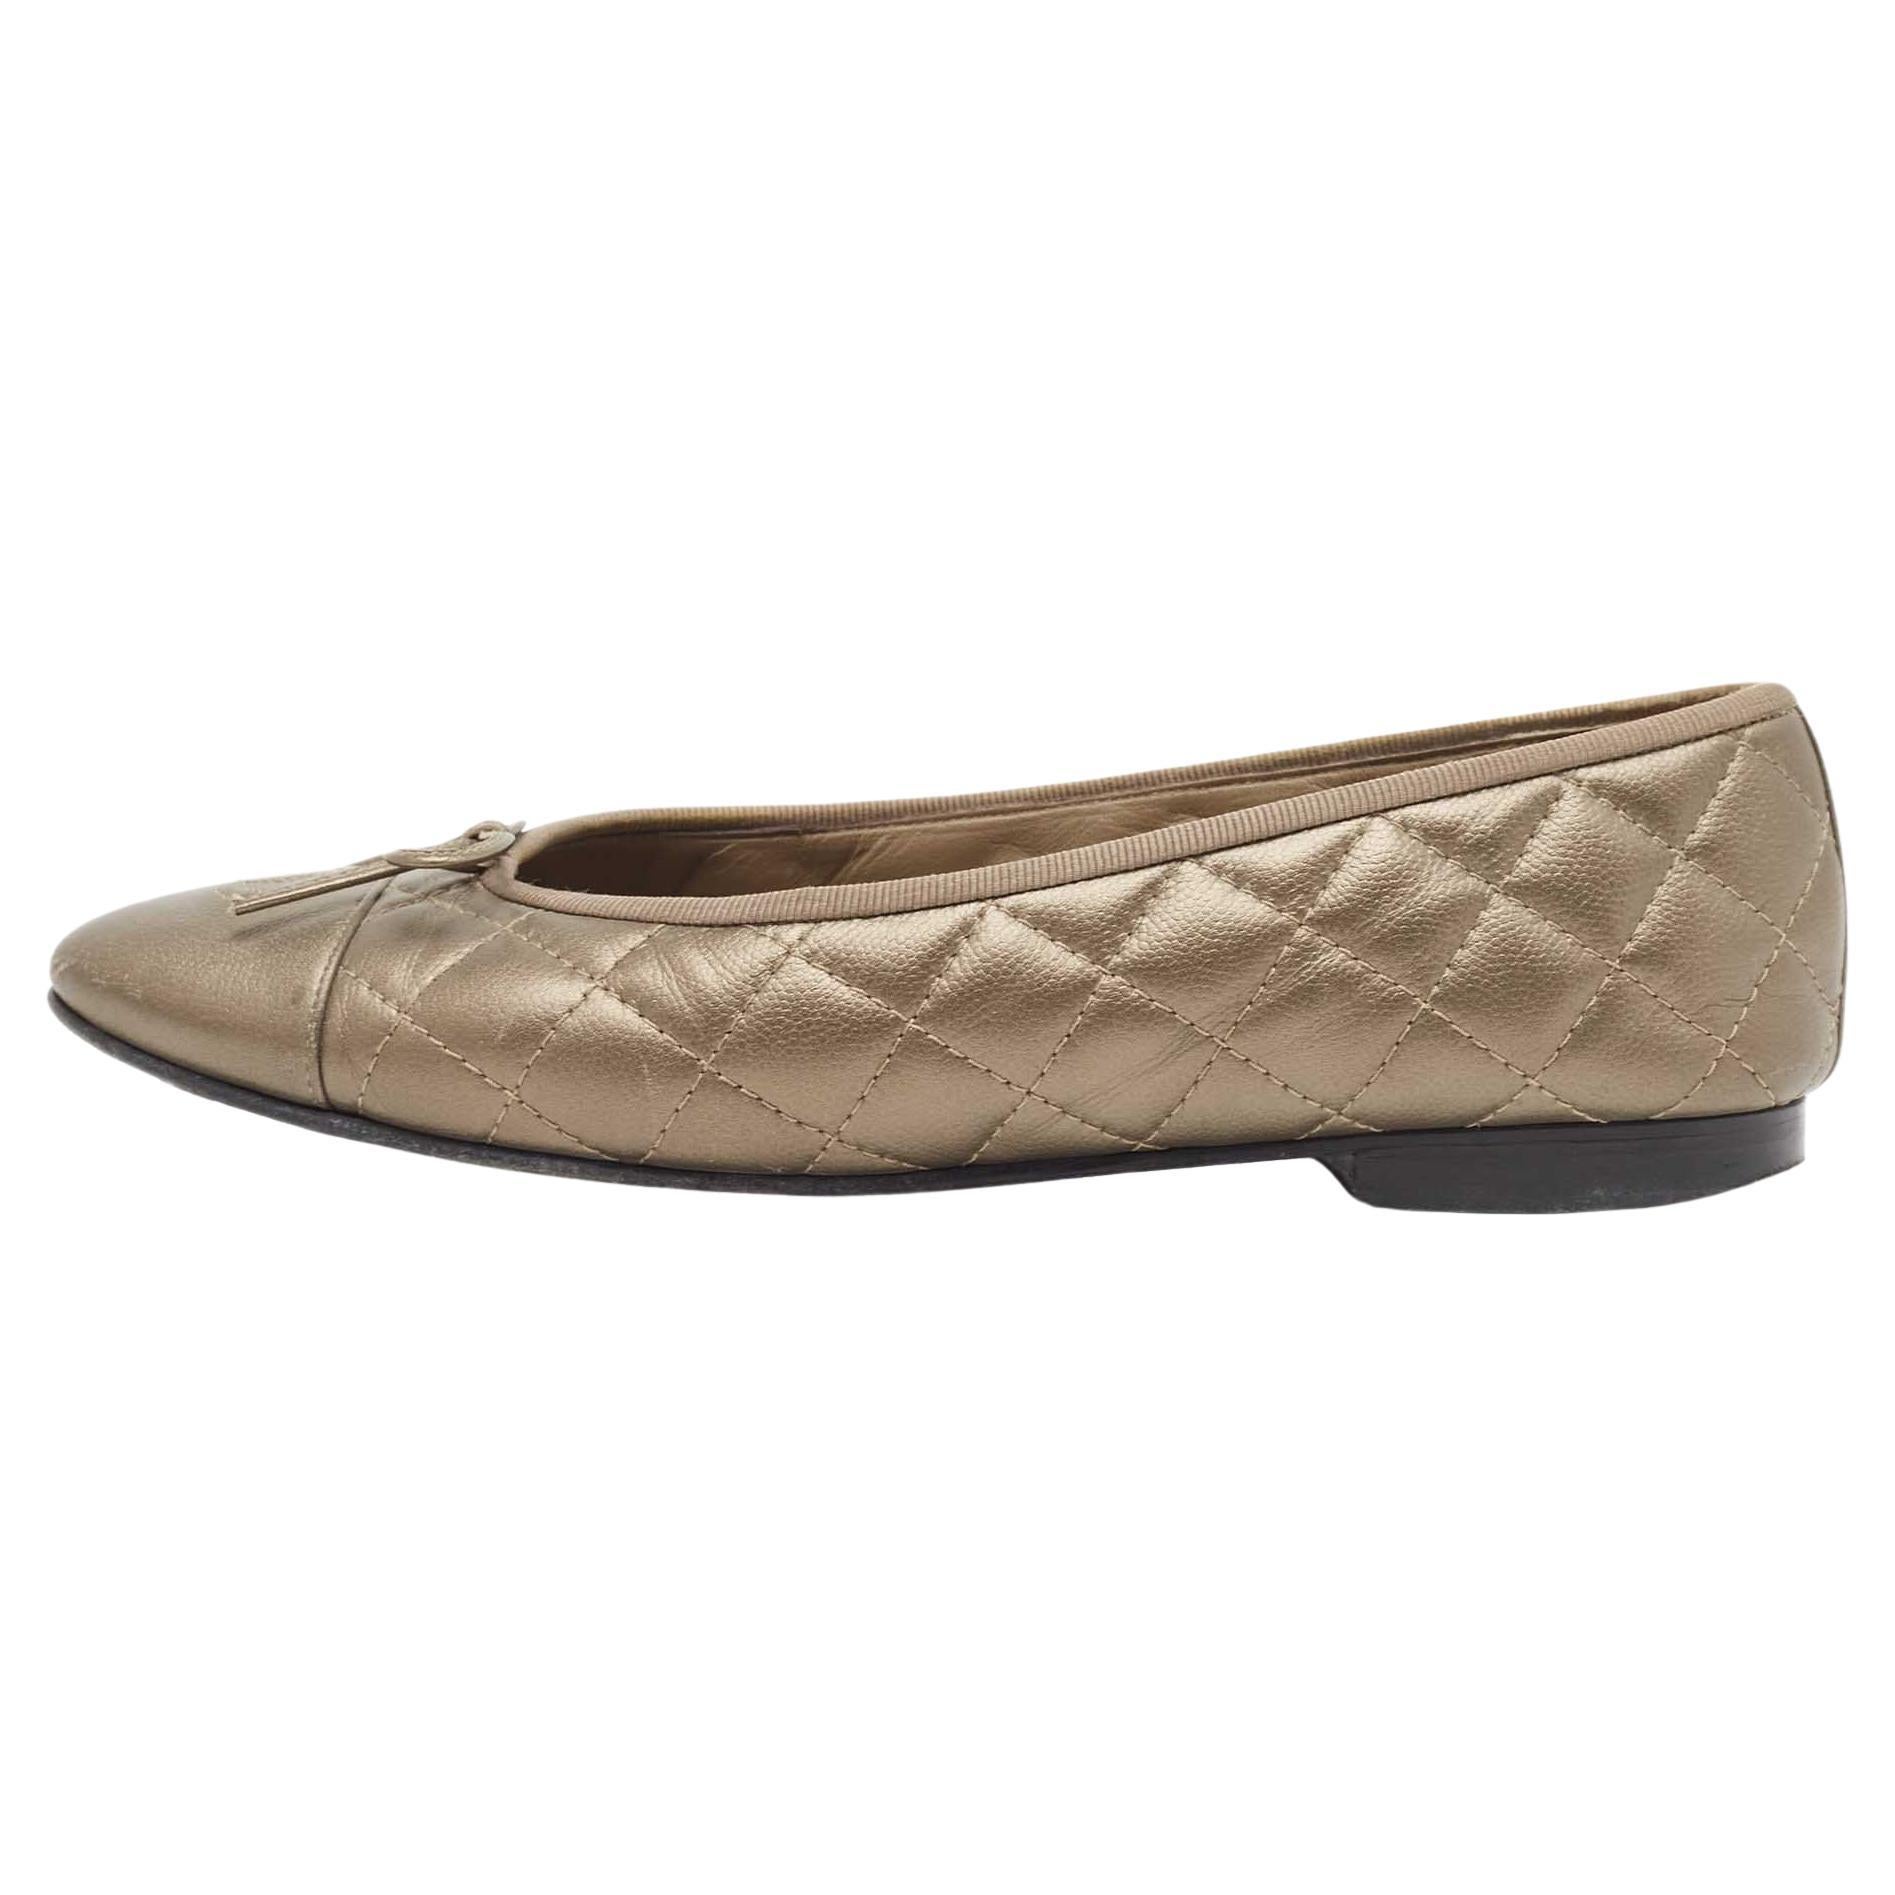 Chanel Metallic Quilted Leather Bow CC Cap Toe Ballet Flats Size 40